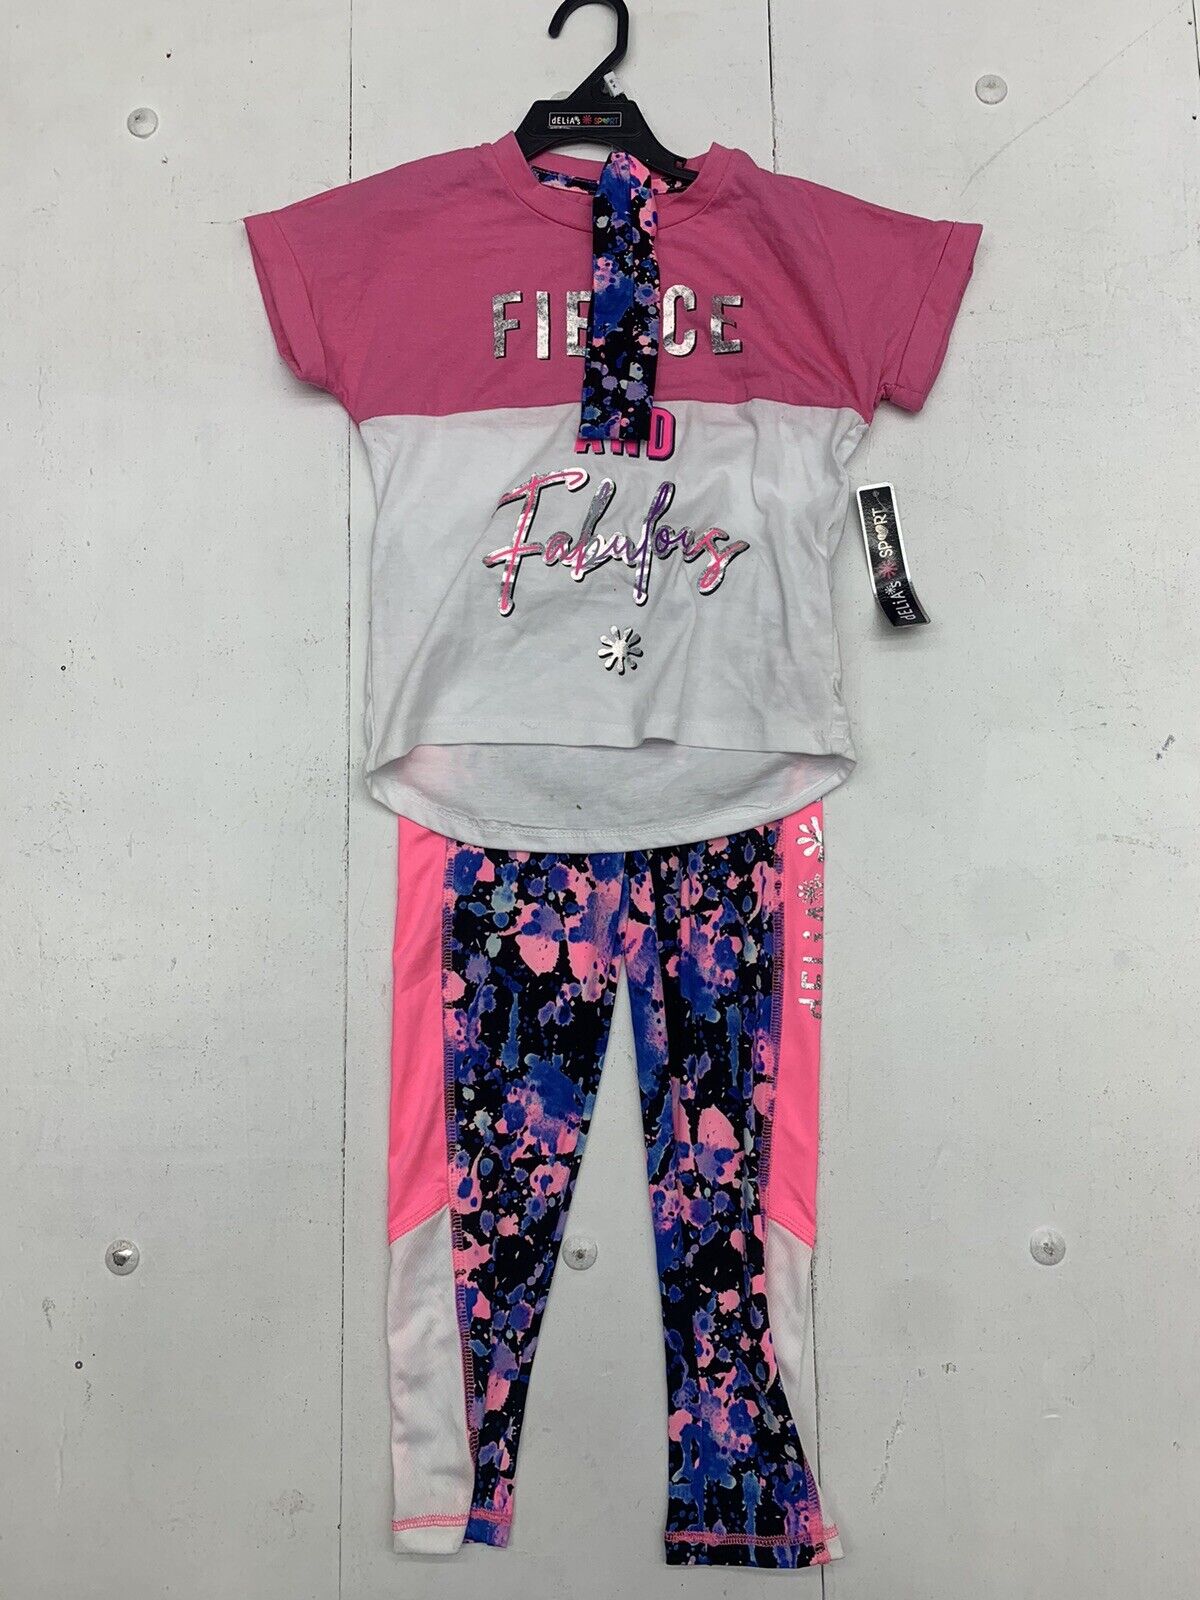 Delia's Sport Girls Pink 3 Piece Athletic Outfit Size 6X - beyond exchange